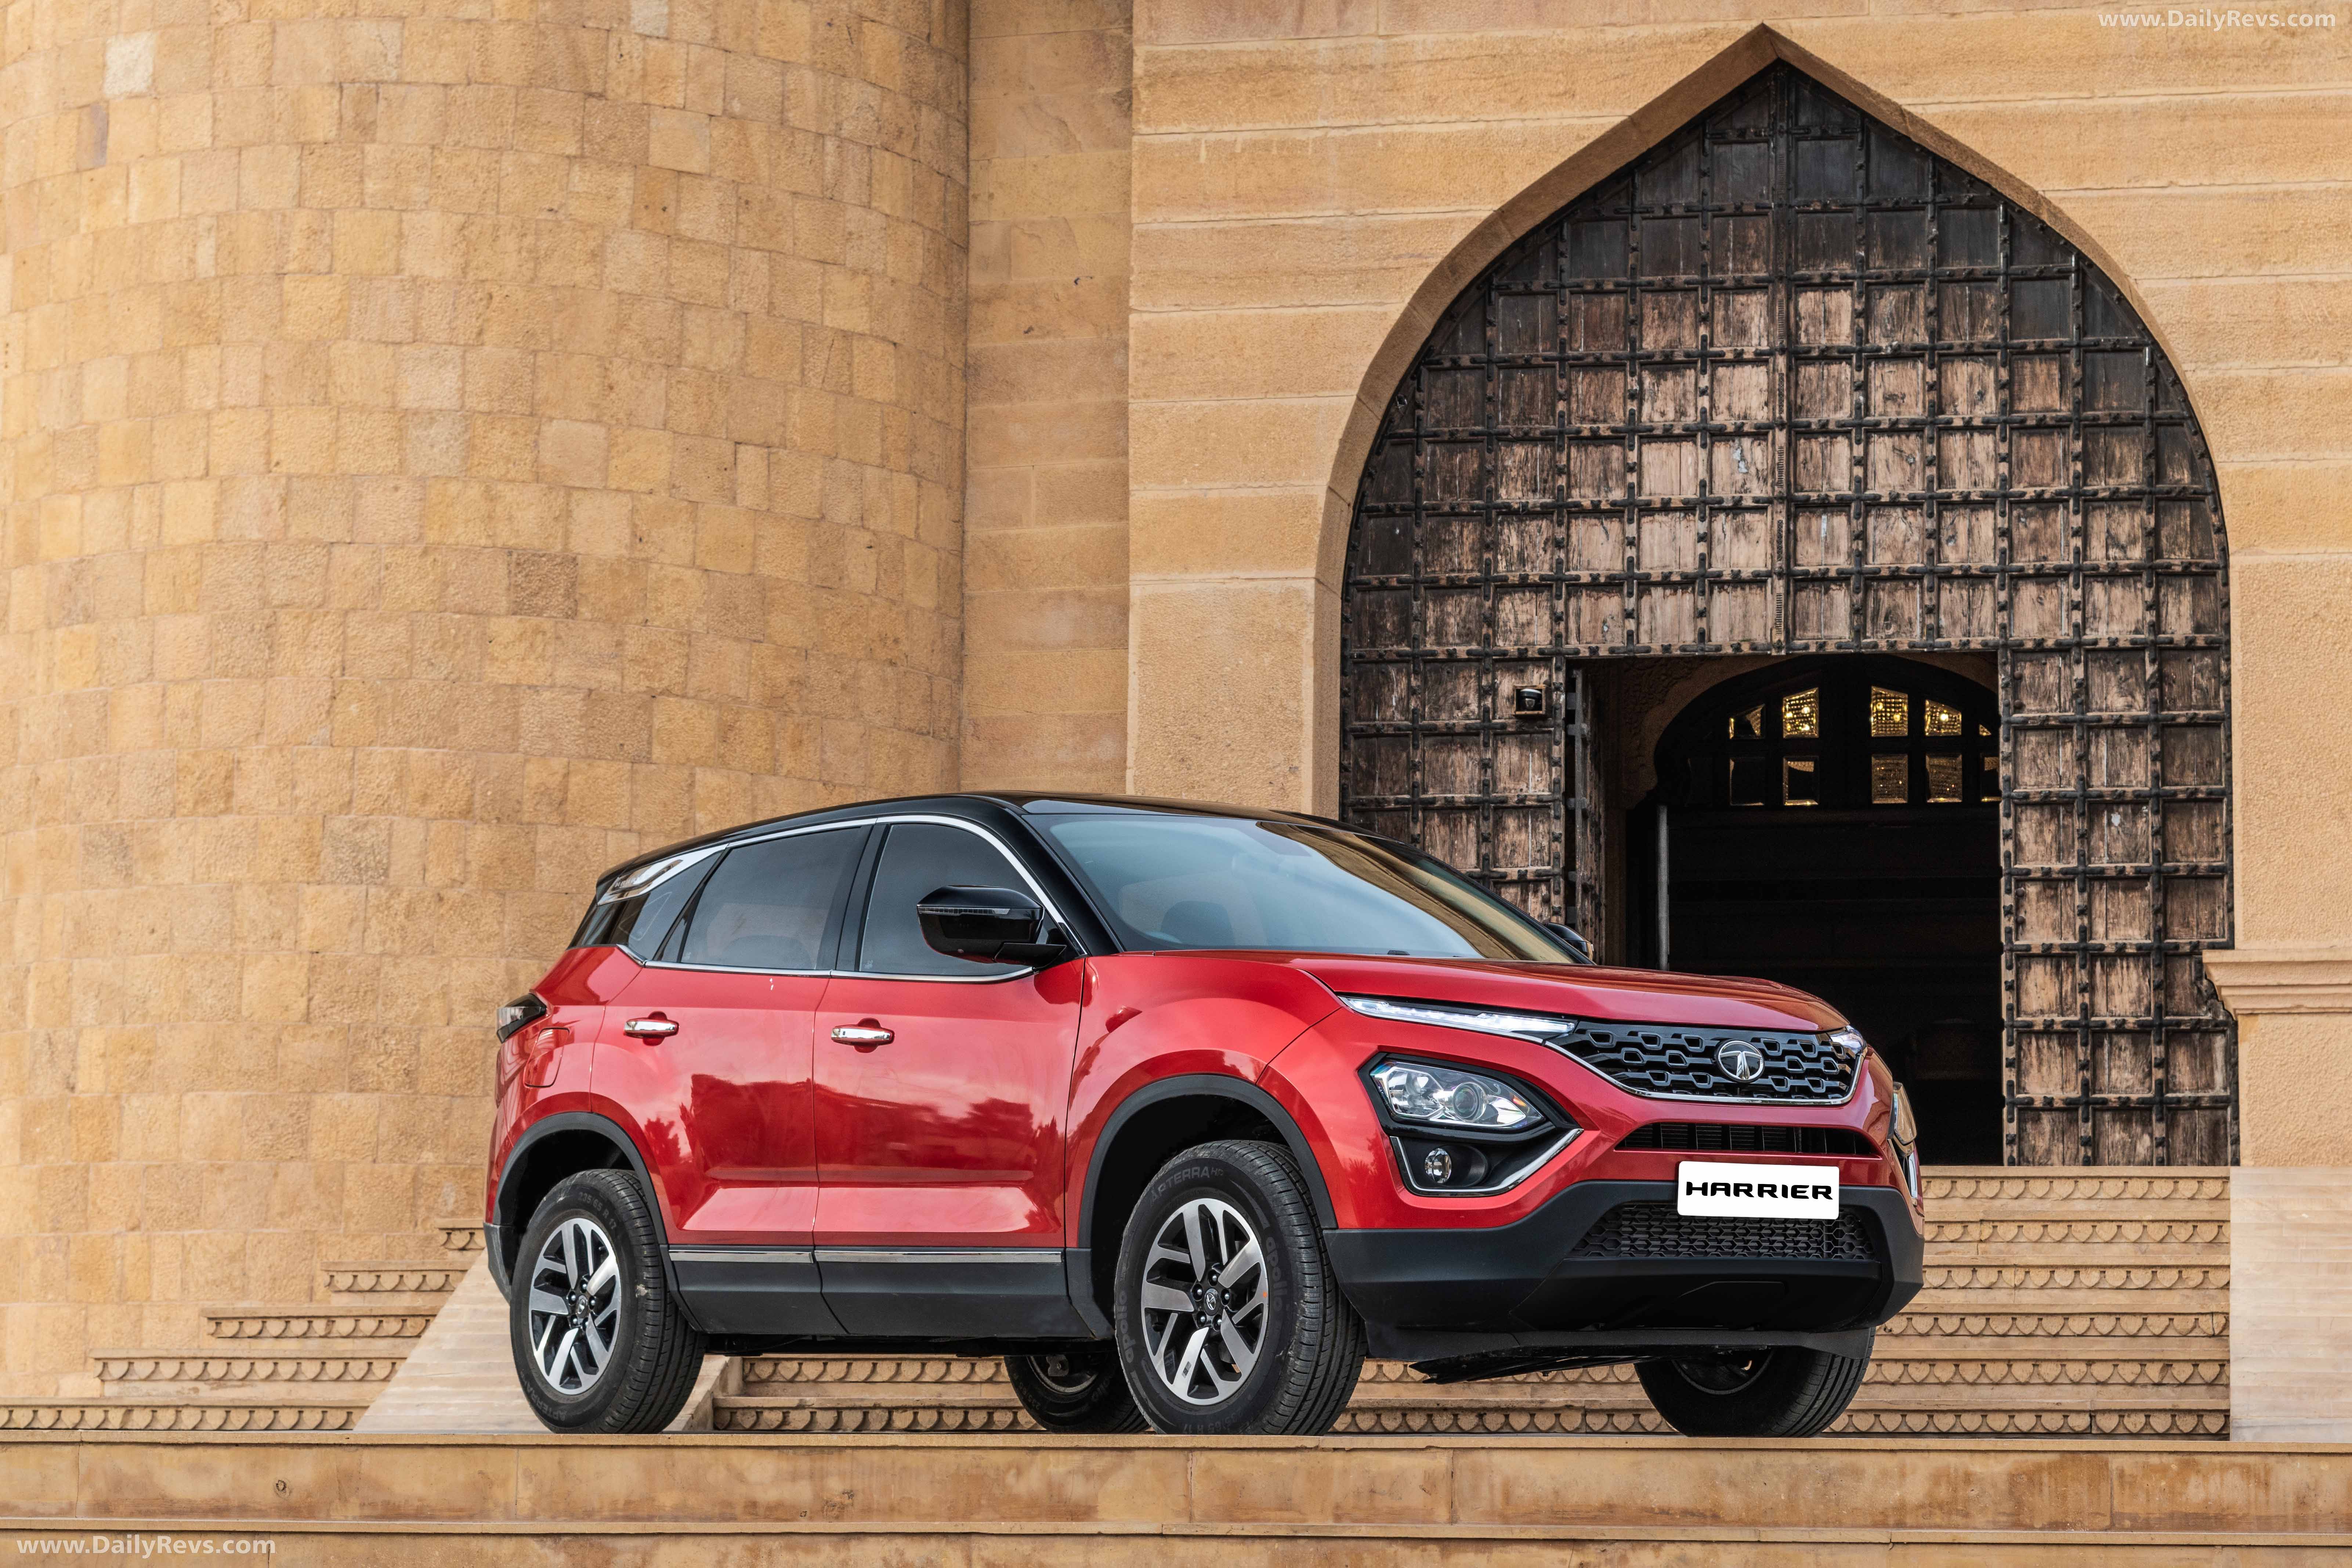 Tata Harrier Pictures Image Photos Wallpaper Dailyrevs